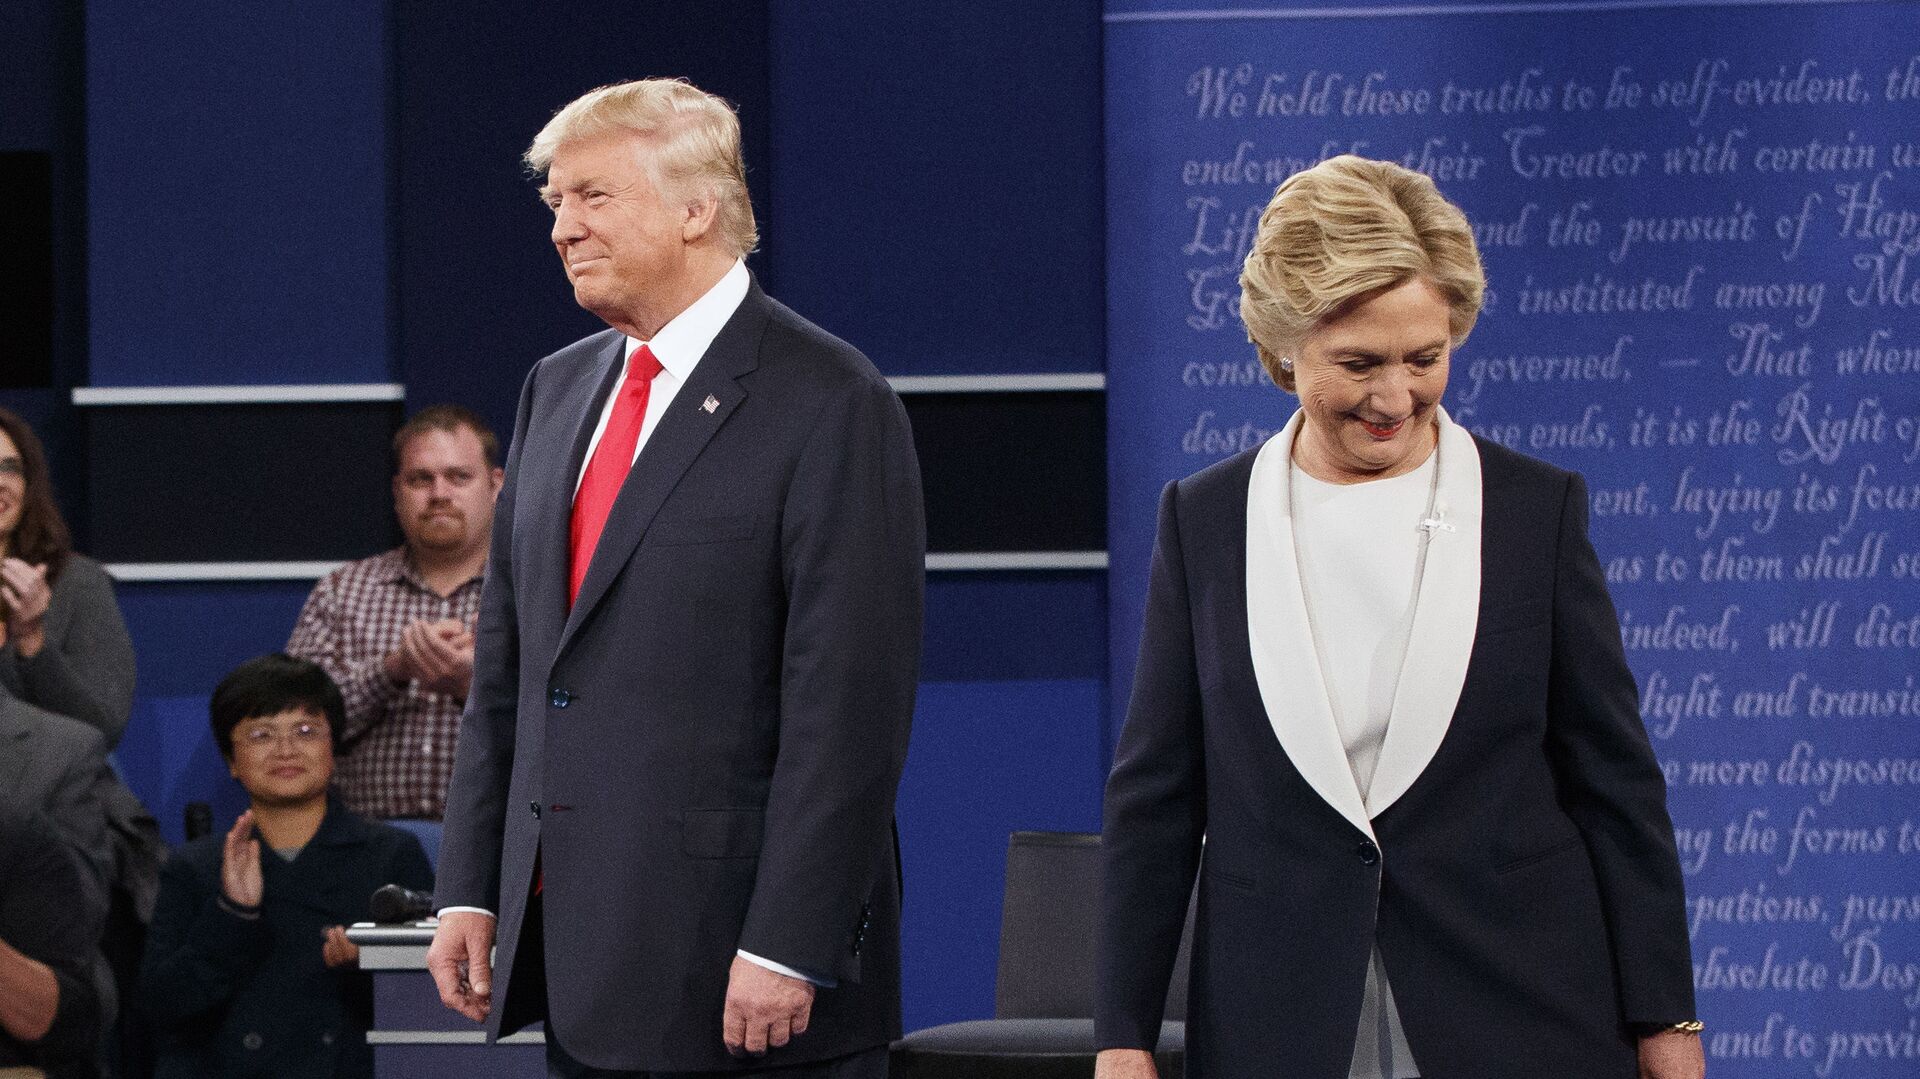 Republican presidential candidate Donald Trump, left, and Democratic presidential candidate Hillary Clinton walk to their seats after arriving for the second presidential debate at Washington University, Sunday, Oct. 9, 2016, in St. Louis - Sputnik International, 1920, 30.03.2022